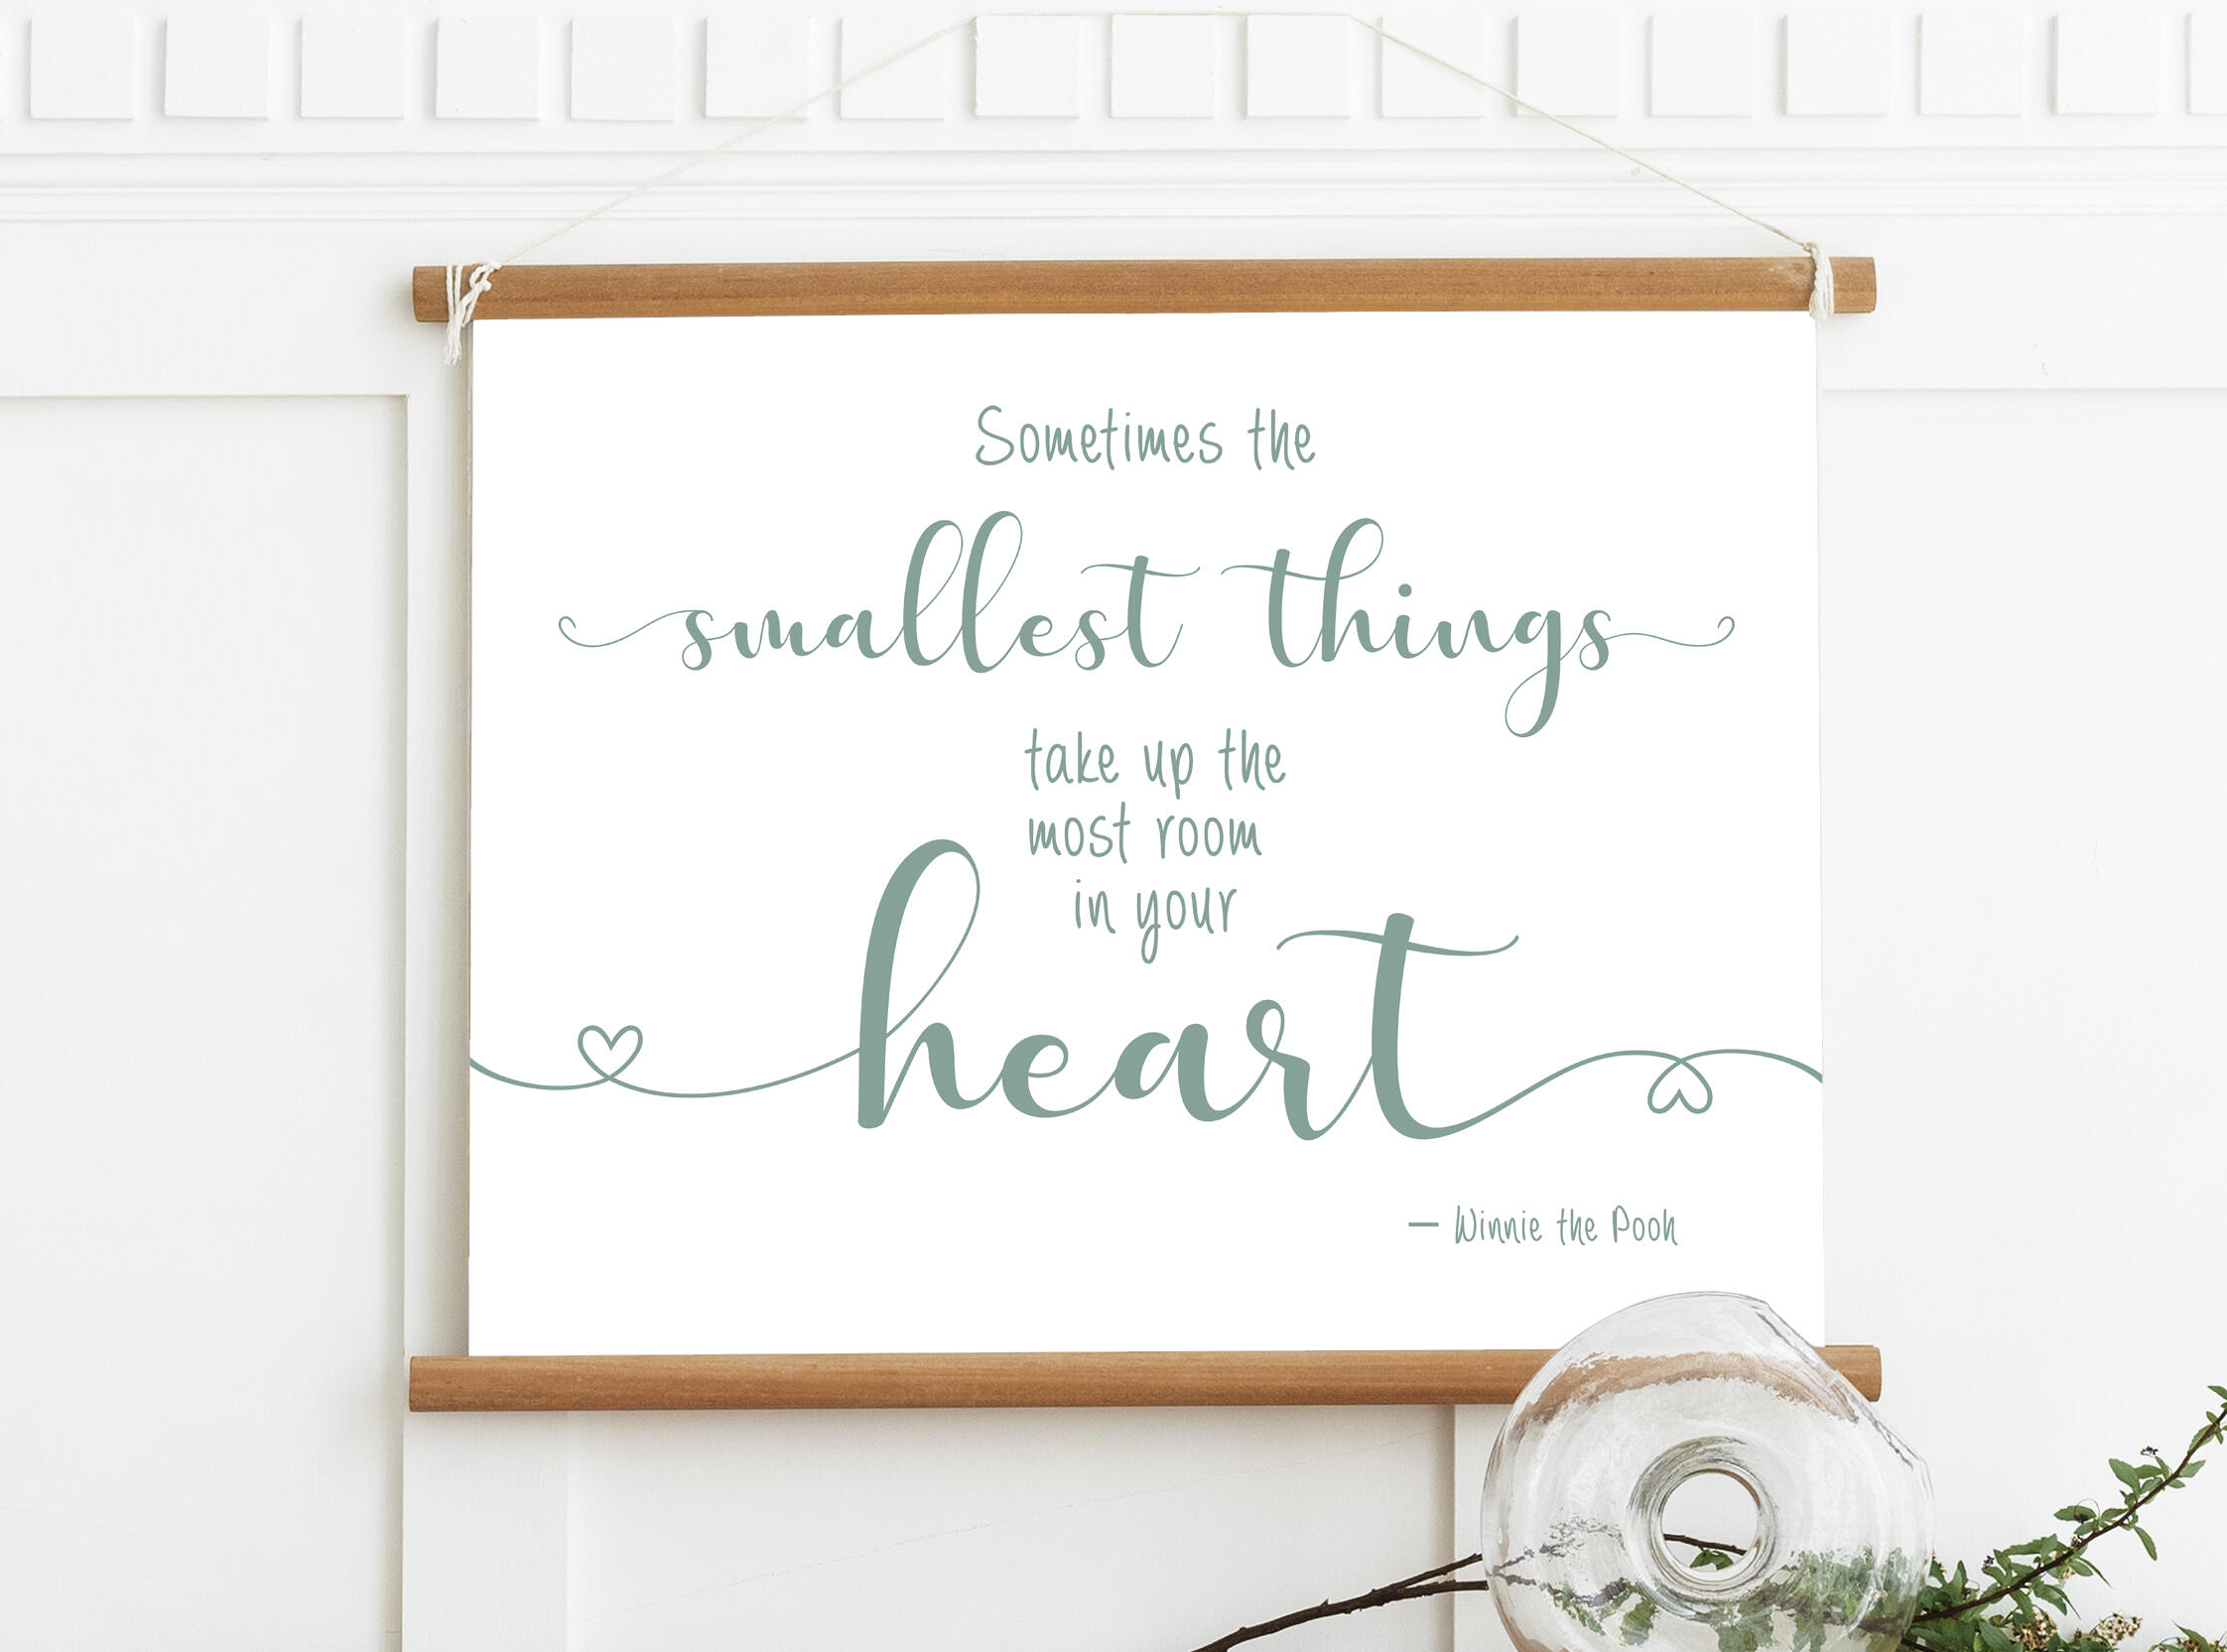 Winnie The Pooh Quote, Sometimes the smallest things take up the most room in your heart, Digital Downloads